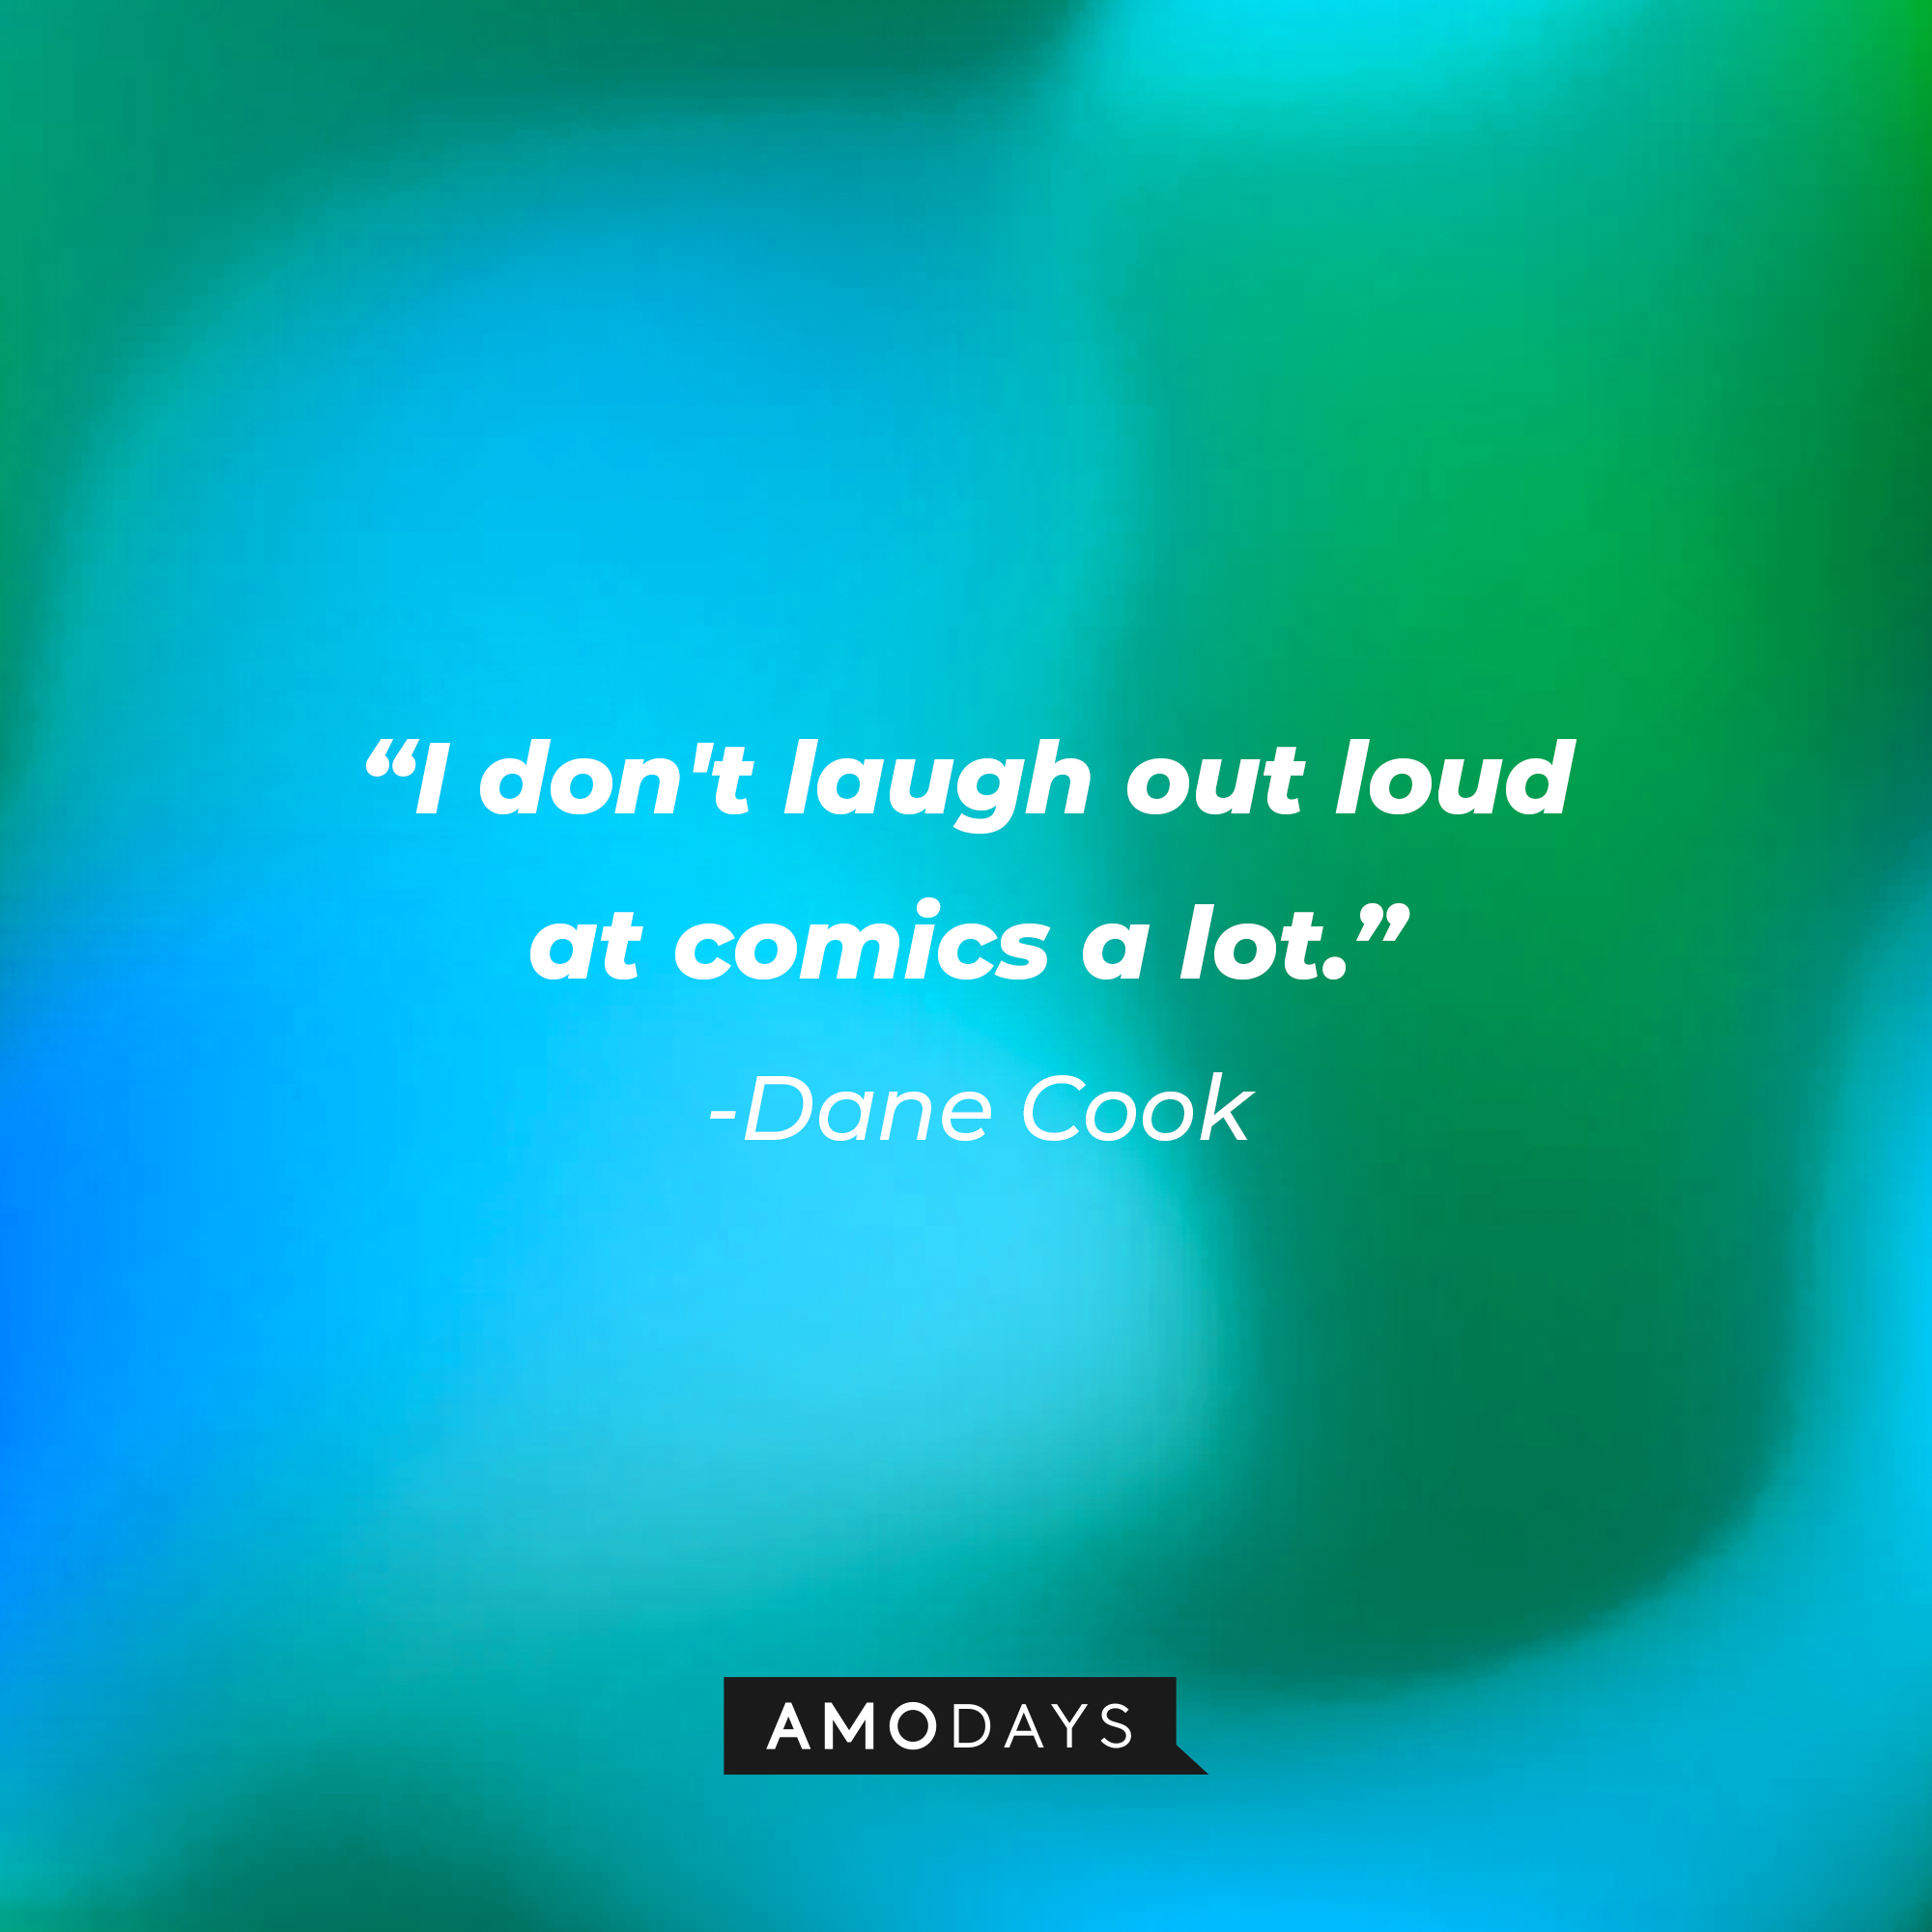 Dane Cook's quote: "I don't laugh out loud at comics a lot.” | Source: Amodays